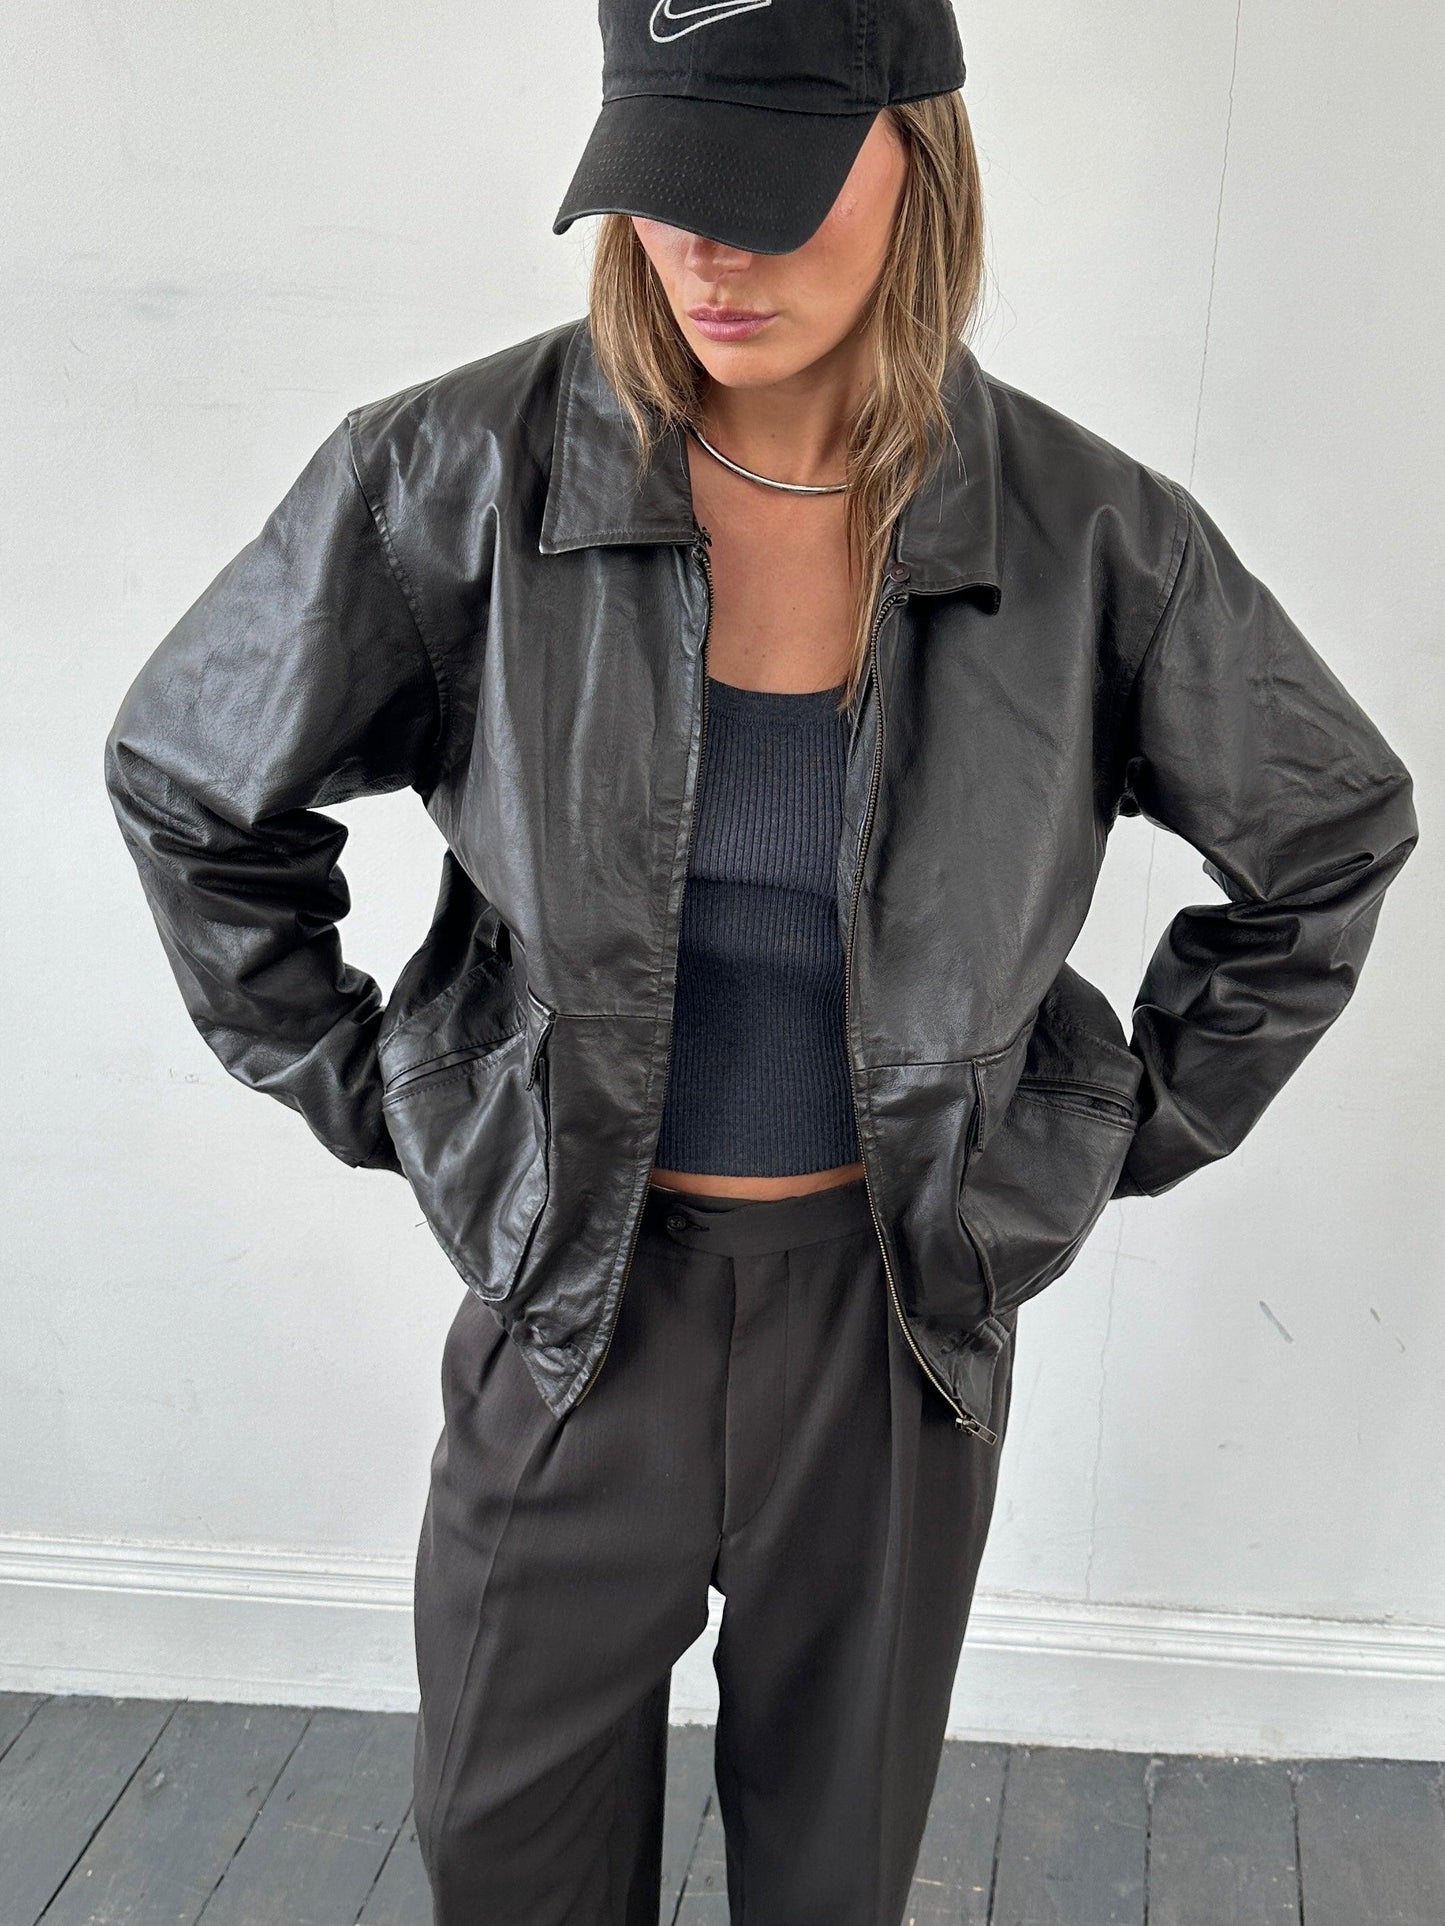 Vintage Smooth Leather Bomber Jacket - L - Known Source